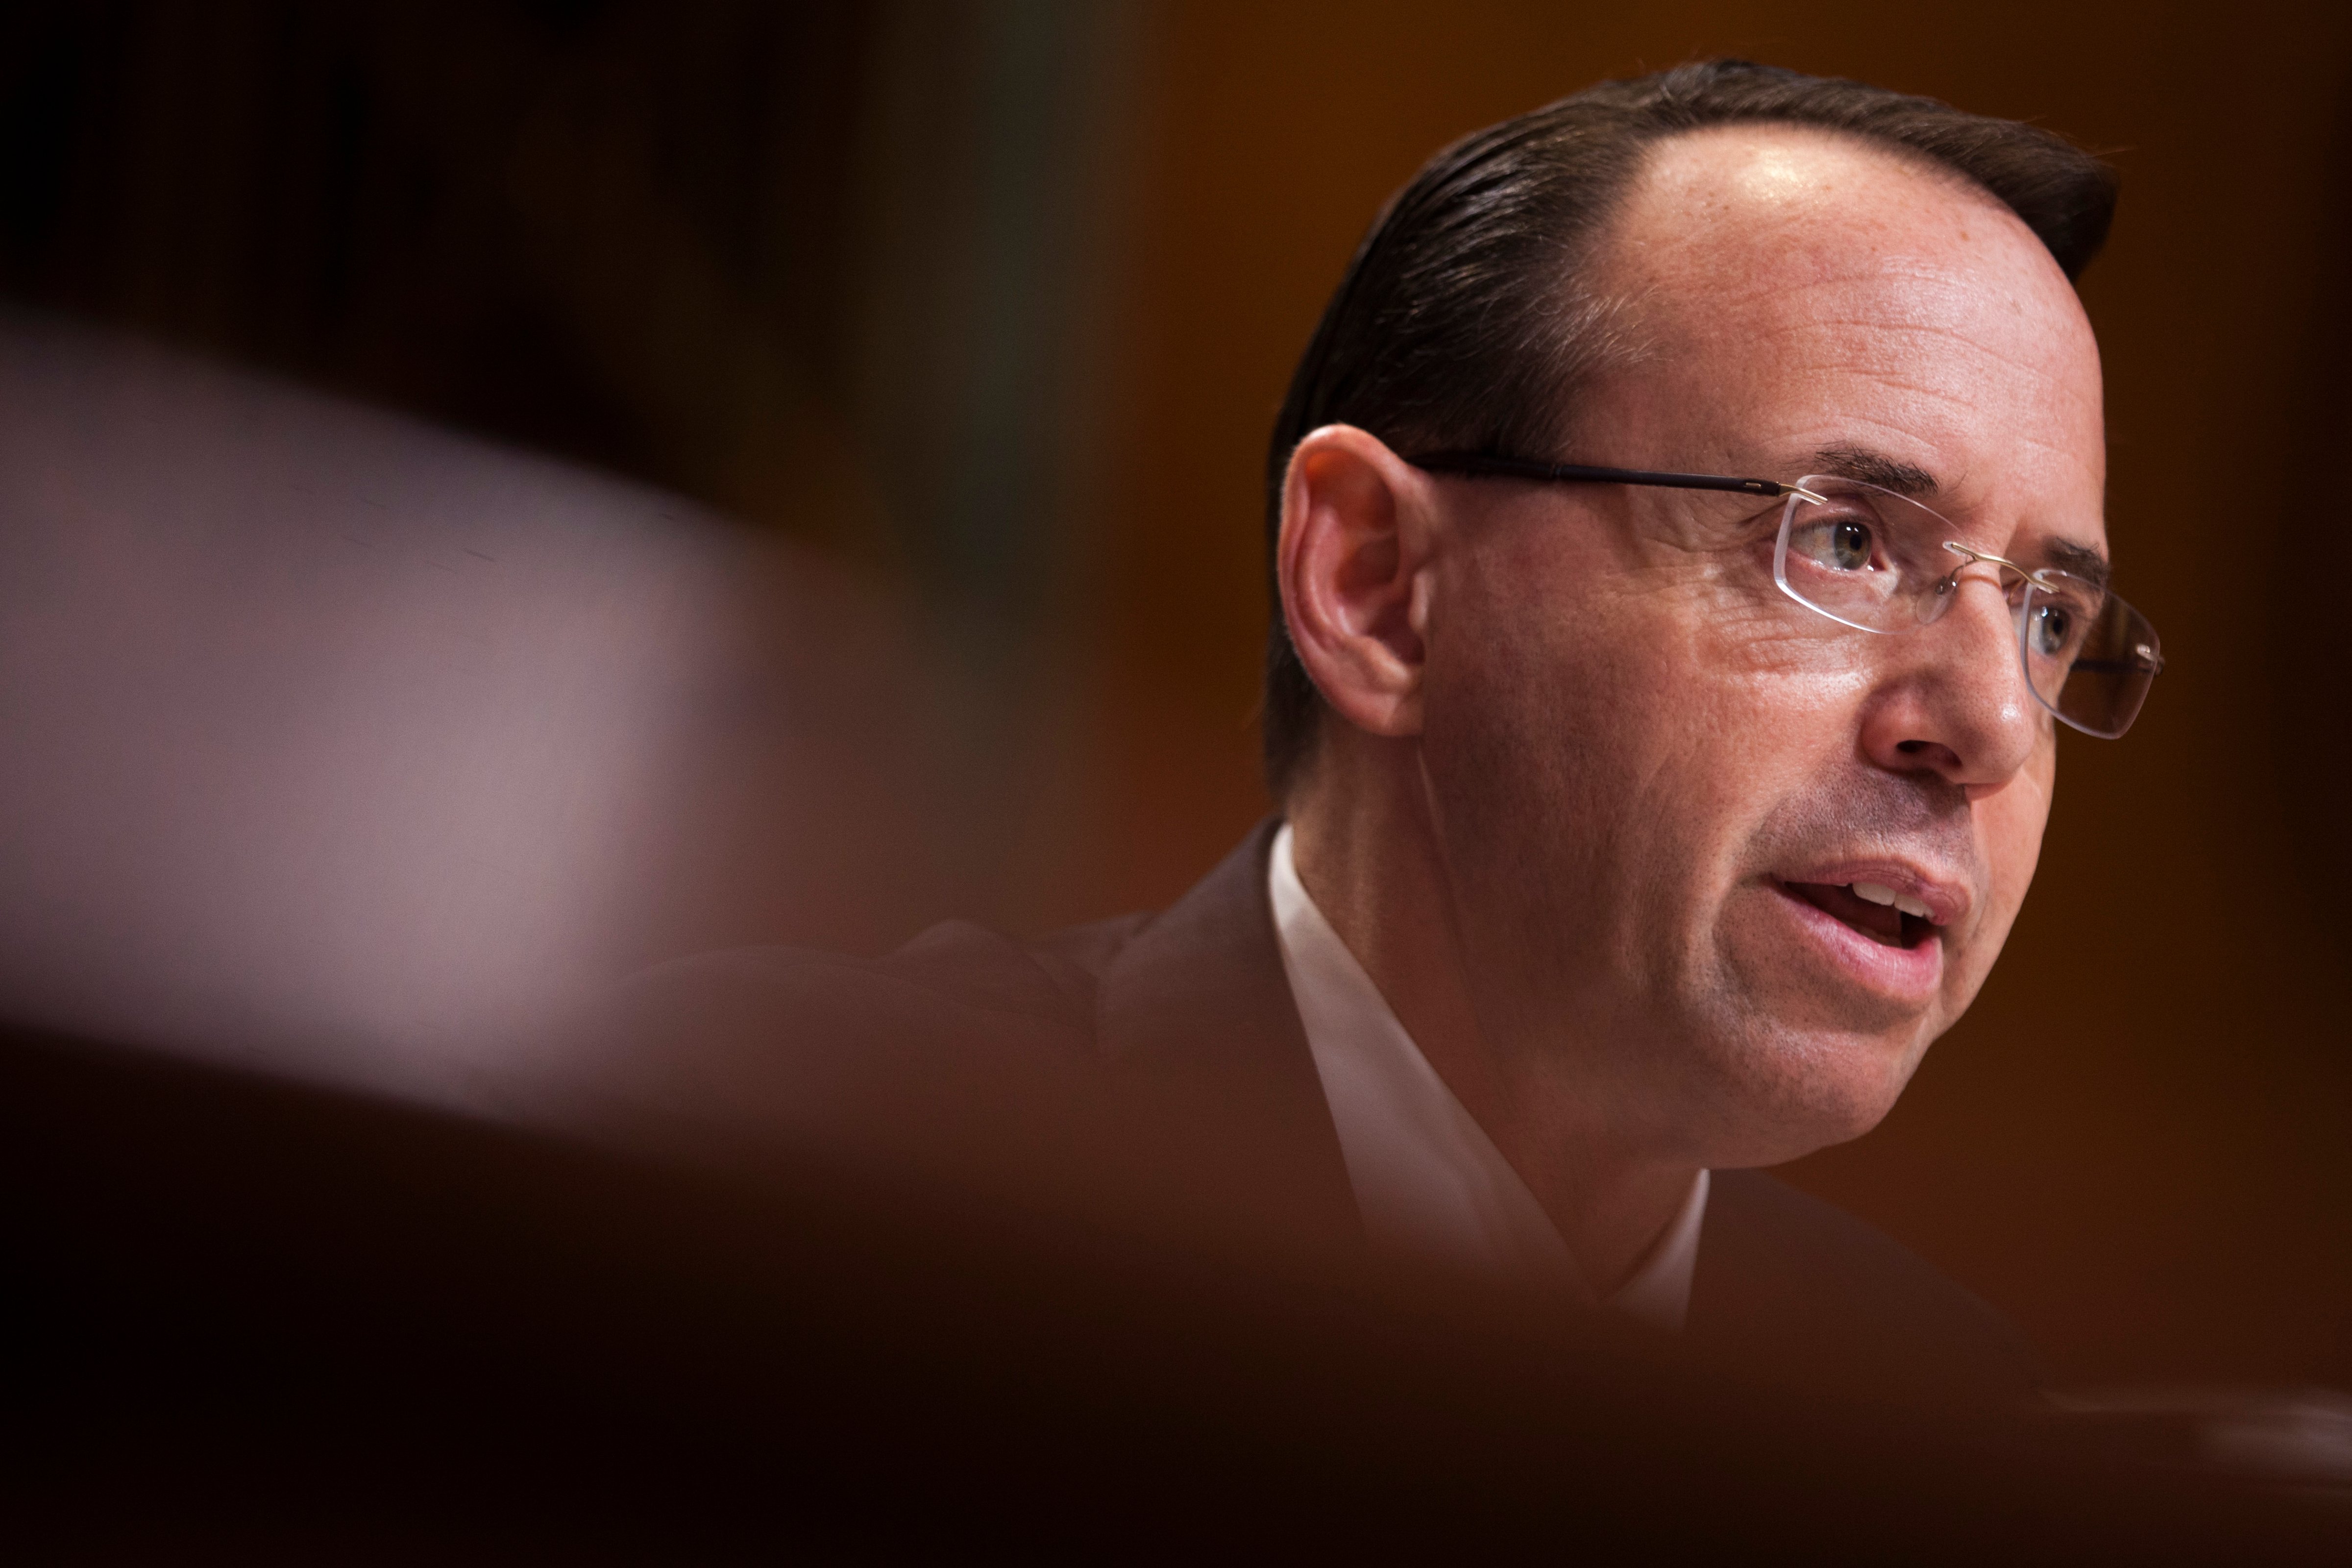 Deputy Attorney General Rod Rosenstein testifies during a Senate Commerce, Justice, Science, and Related Agencies Subcommittee hearing on the Justice Department's proposed FY18 budget  on Capitol Hill on June 13, 2017 in Washington, D.C. (Zach Gibson&mdash;Getty Images)